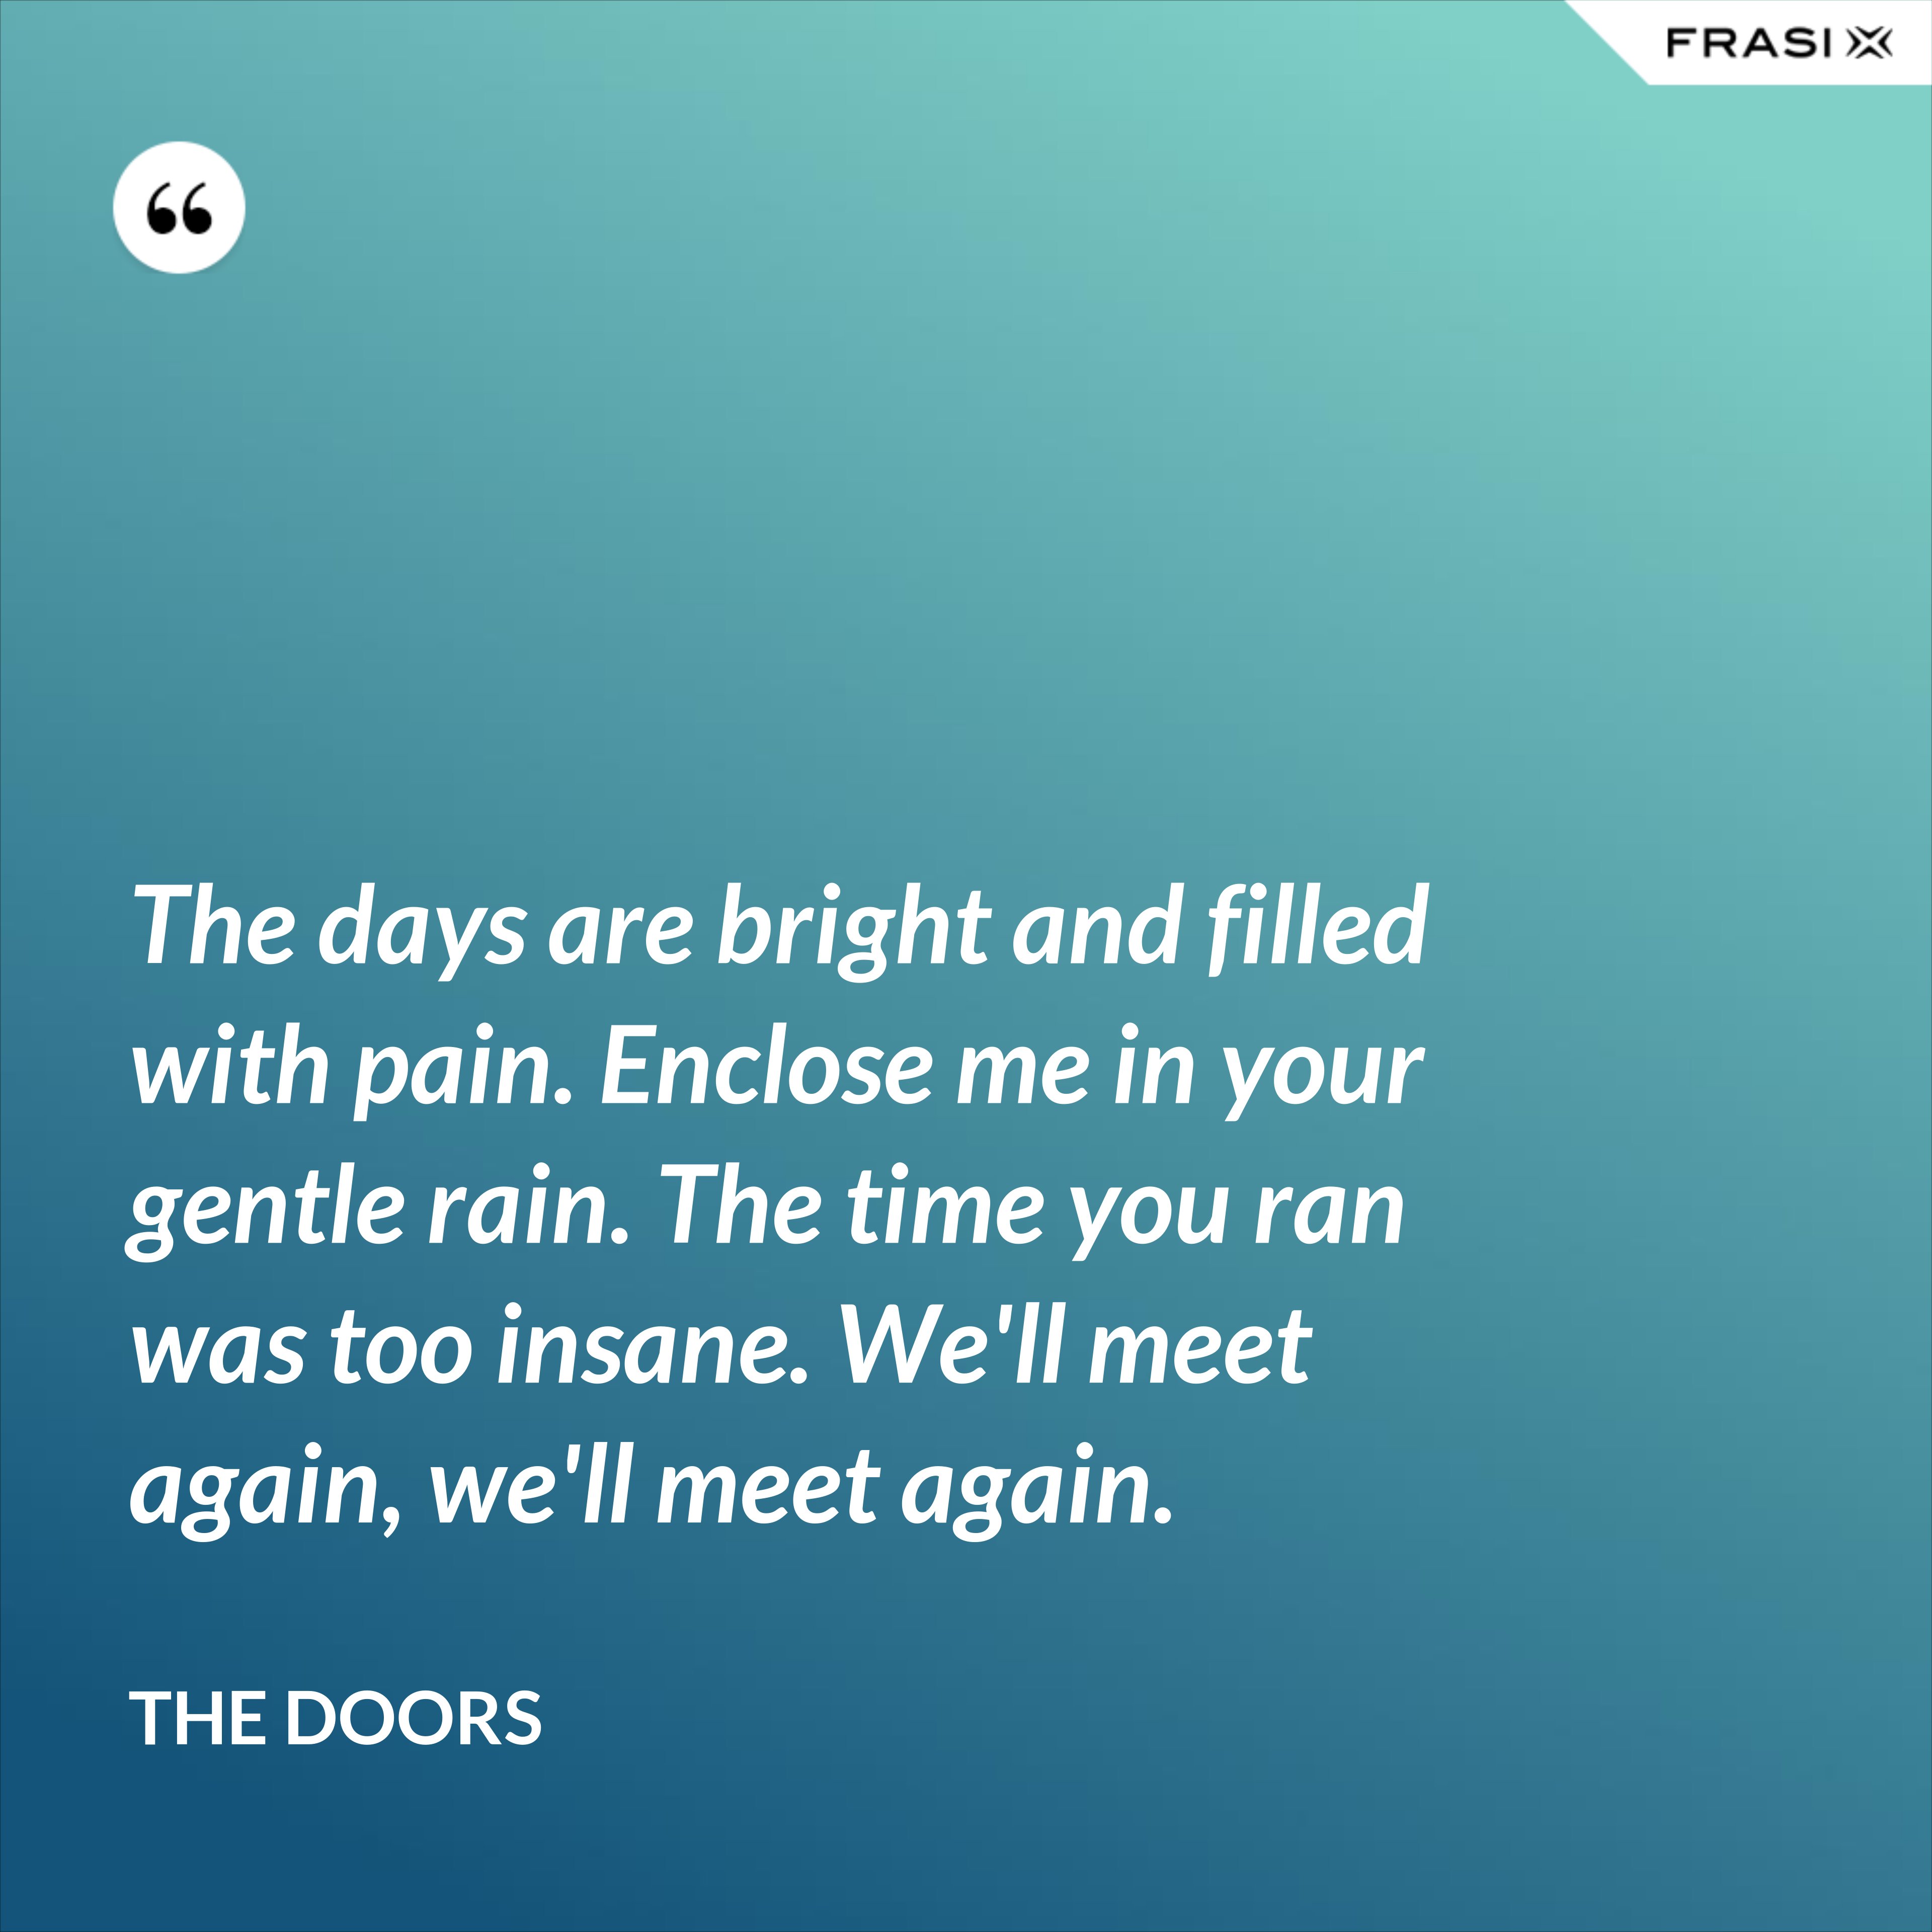 The days are bright and filled with pain. Enclose me in your gentle rain. The time you ran was too insane. We'll meet again, we'll meet again. - The Doors